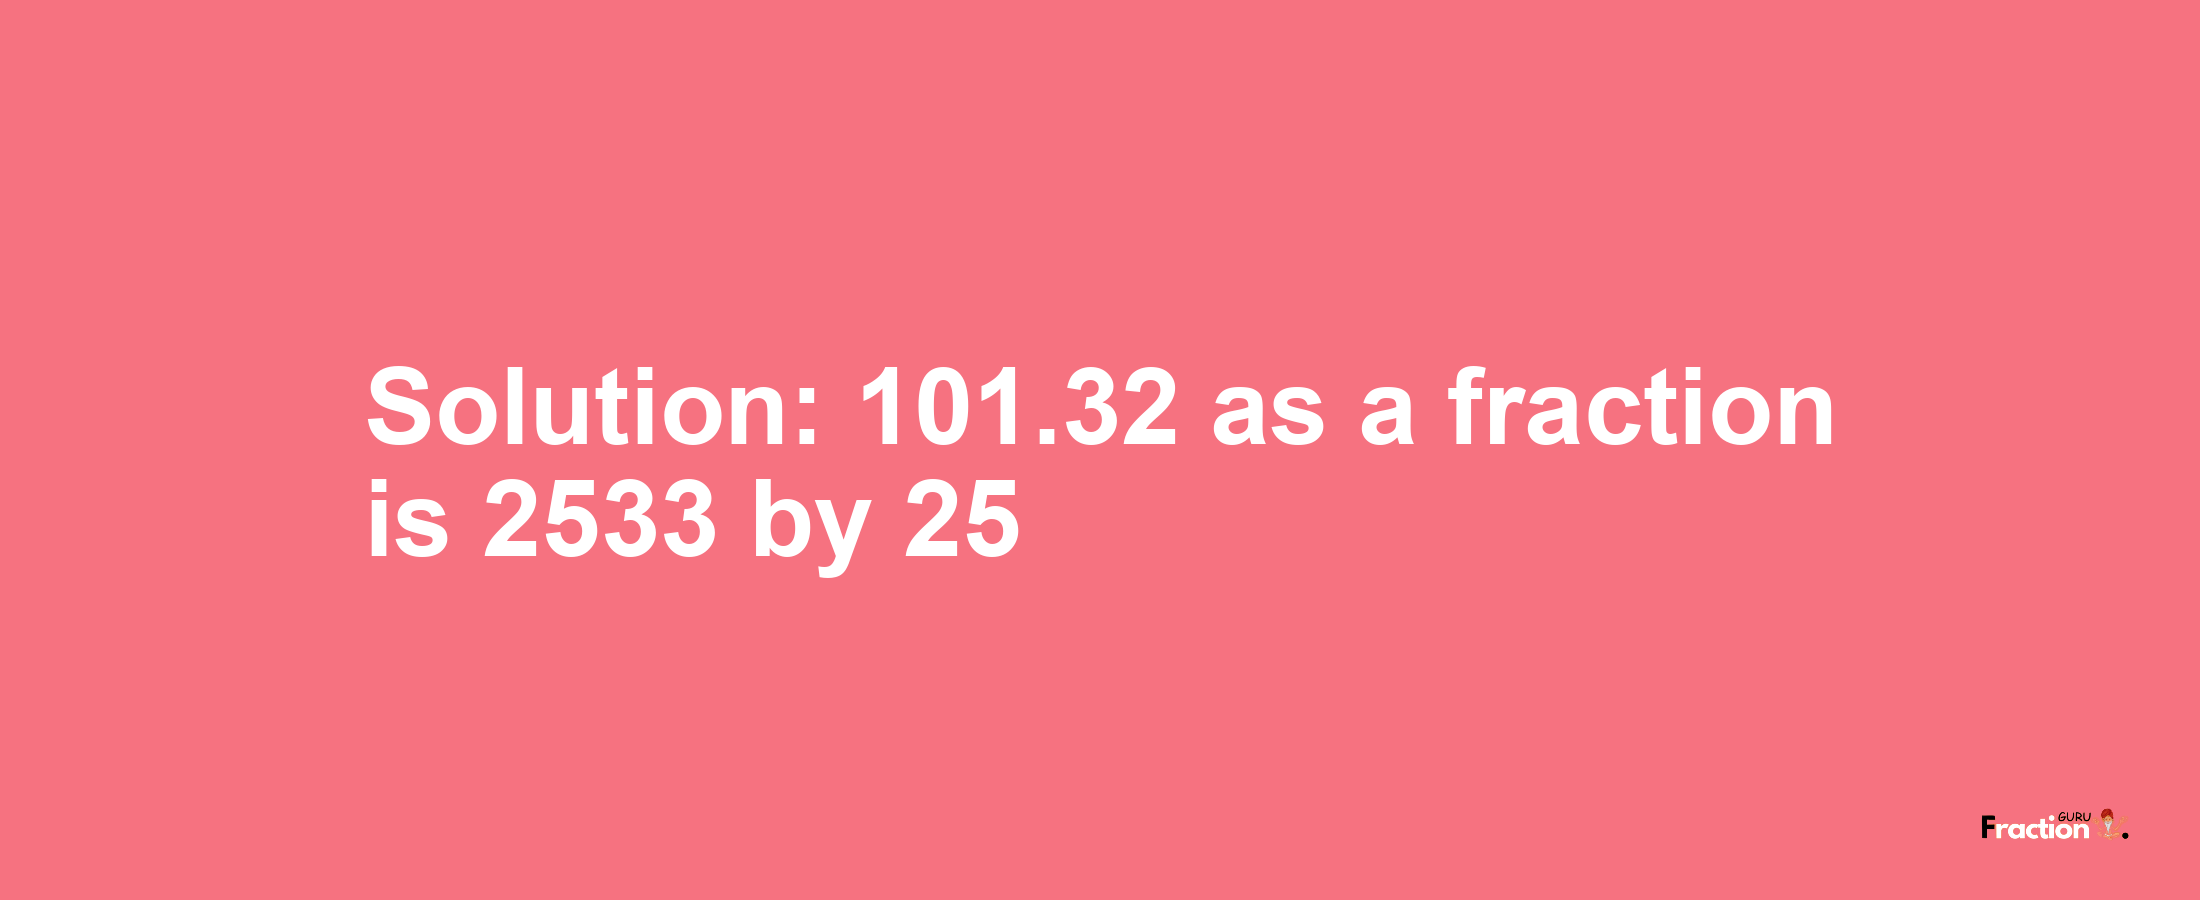 Solution:101.32 as a fraction is 2533/25